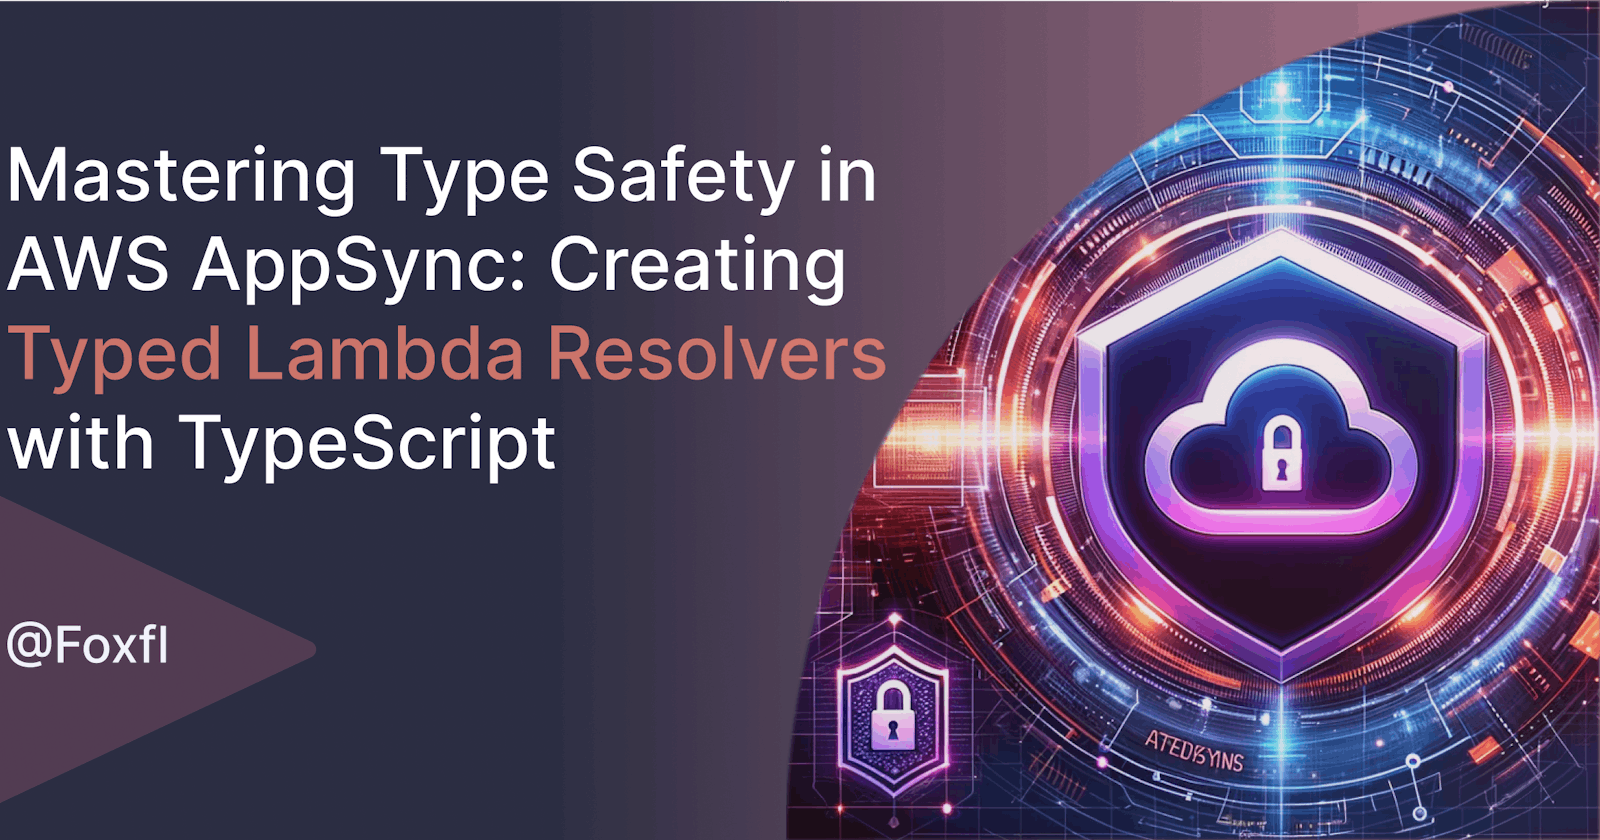 Mastering Type Safety in AWS AppSync: Creating Typed Lambda Resolvers with TypeScript